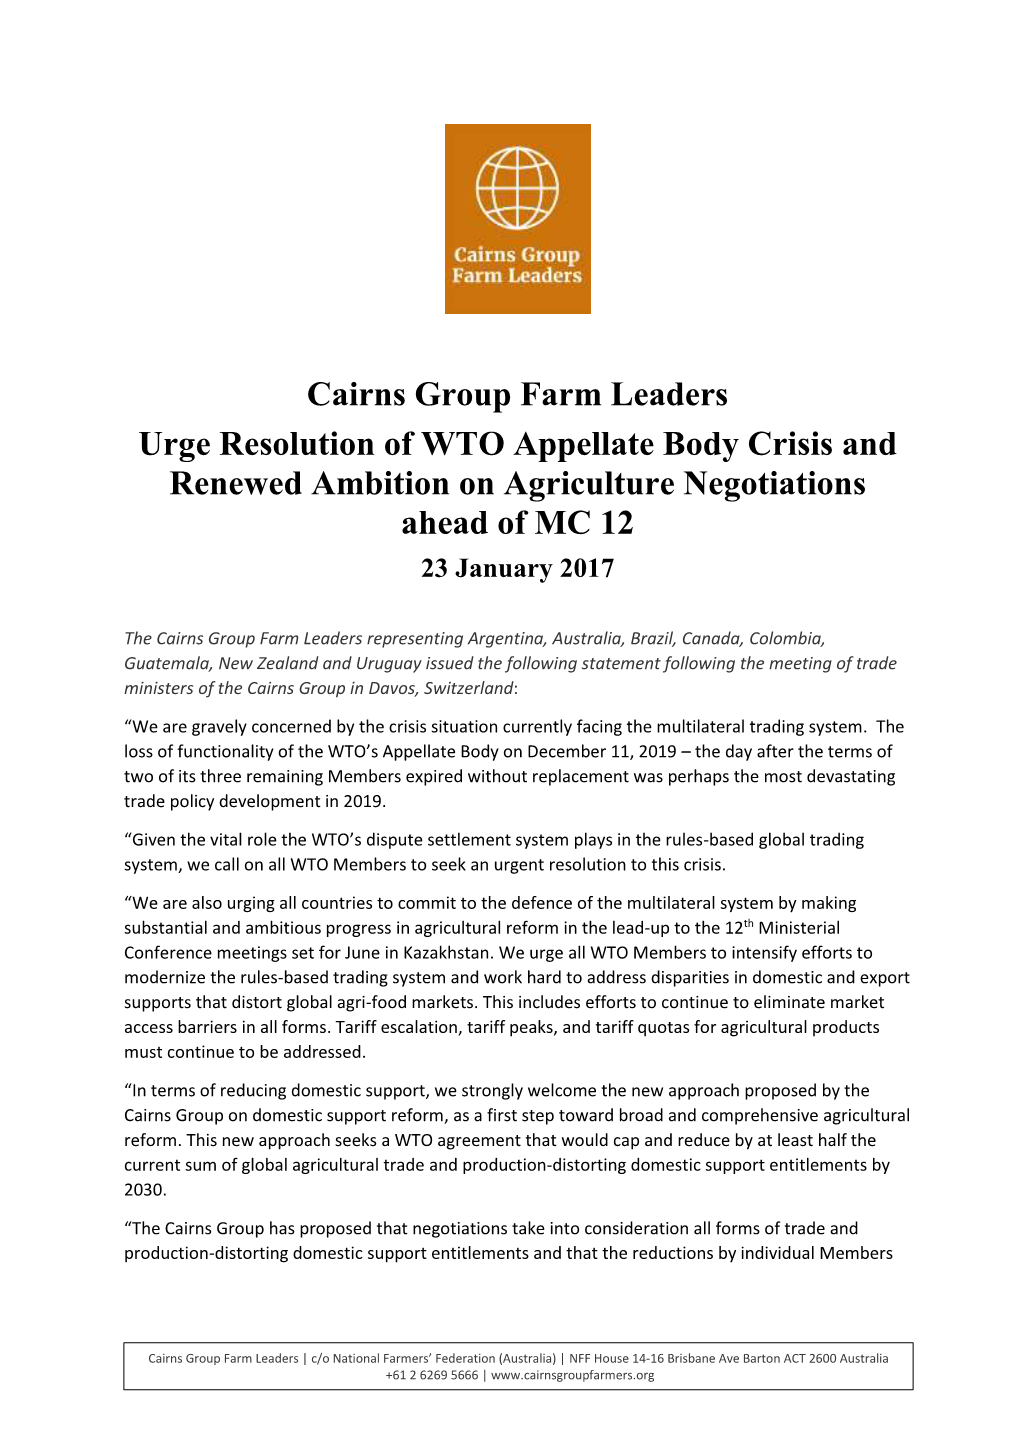 Cairns Group Farm Leaders Statement